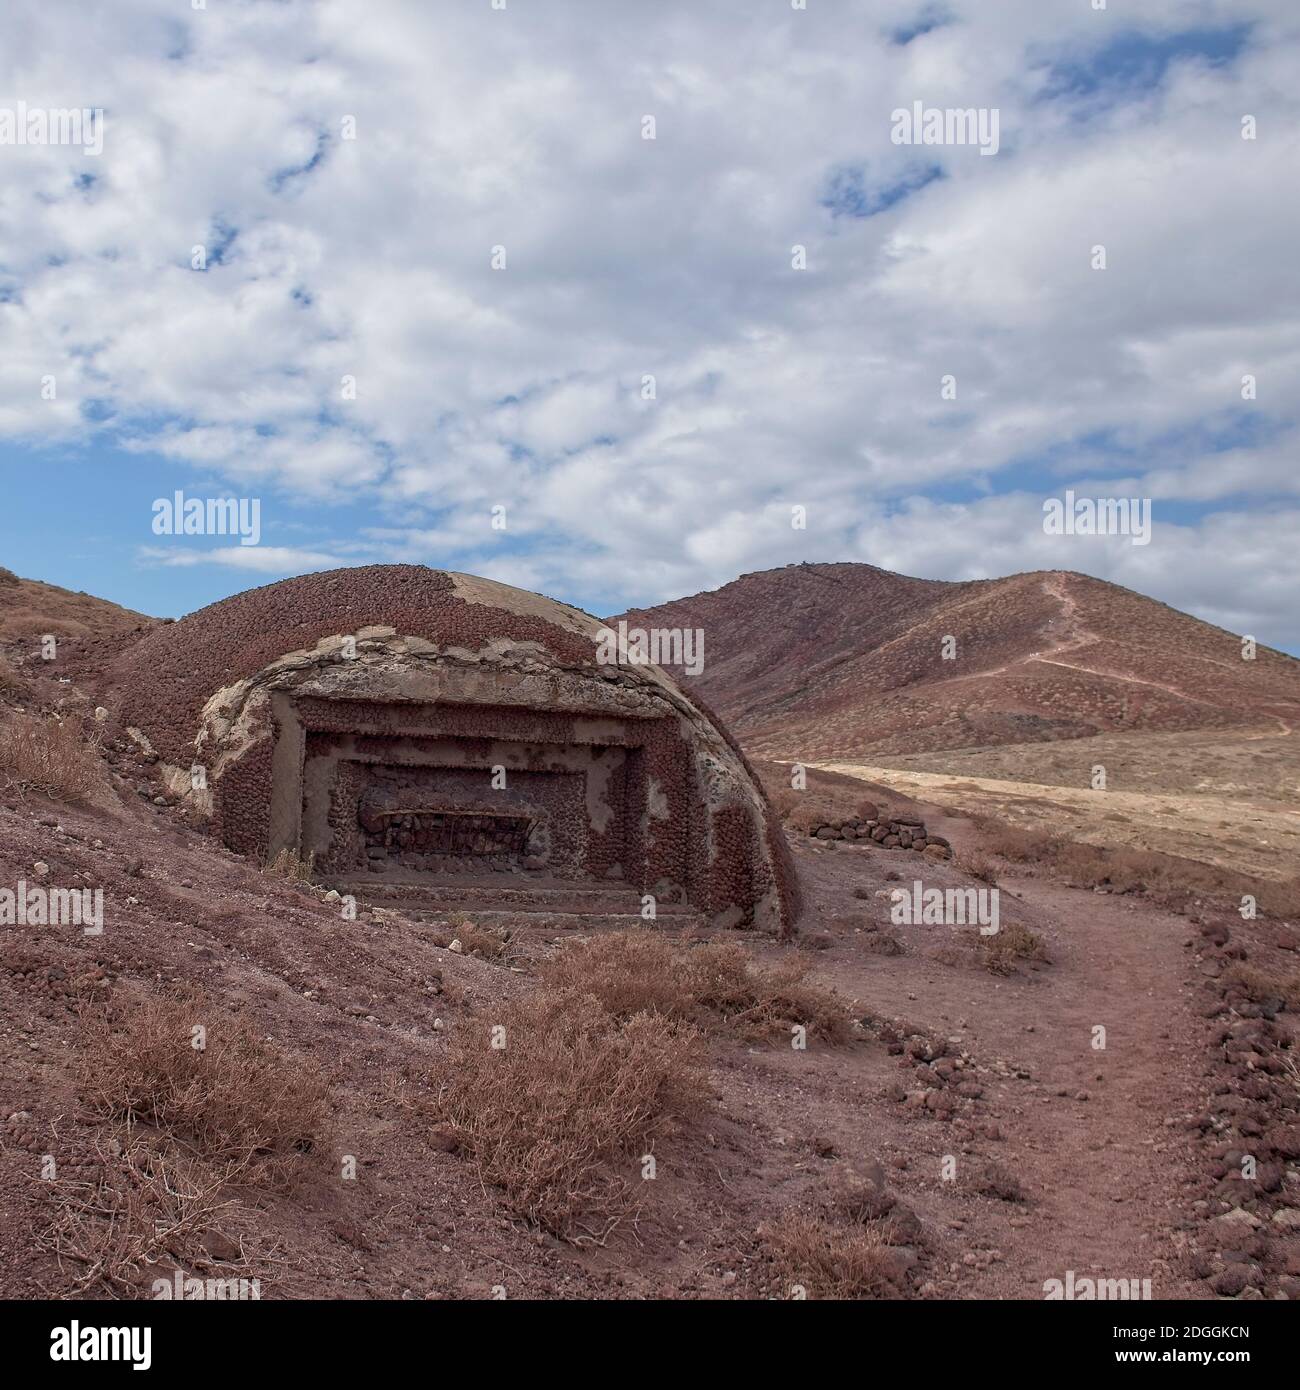 A camouflaged World War 2 defence bunker on the Special Nature Reserve Red Mountain (Roja Montana), Tenerife, Canary Islands, Spain. Stock Photo